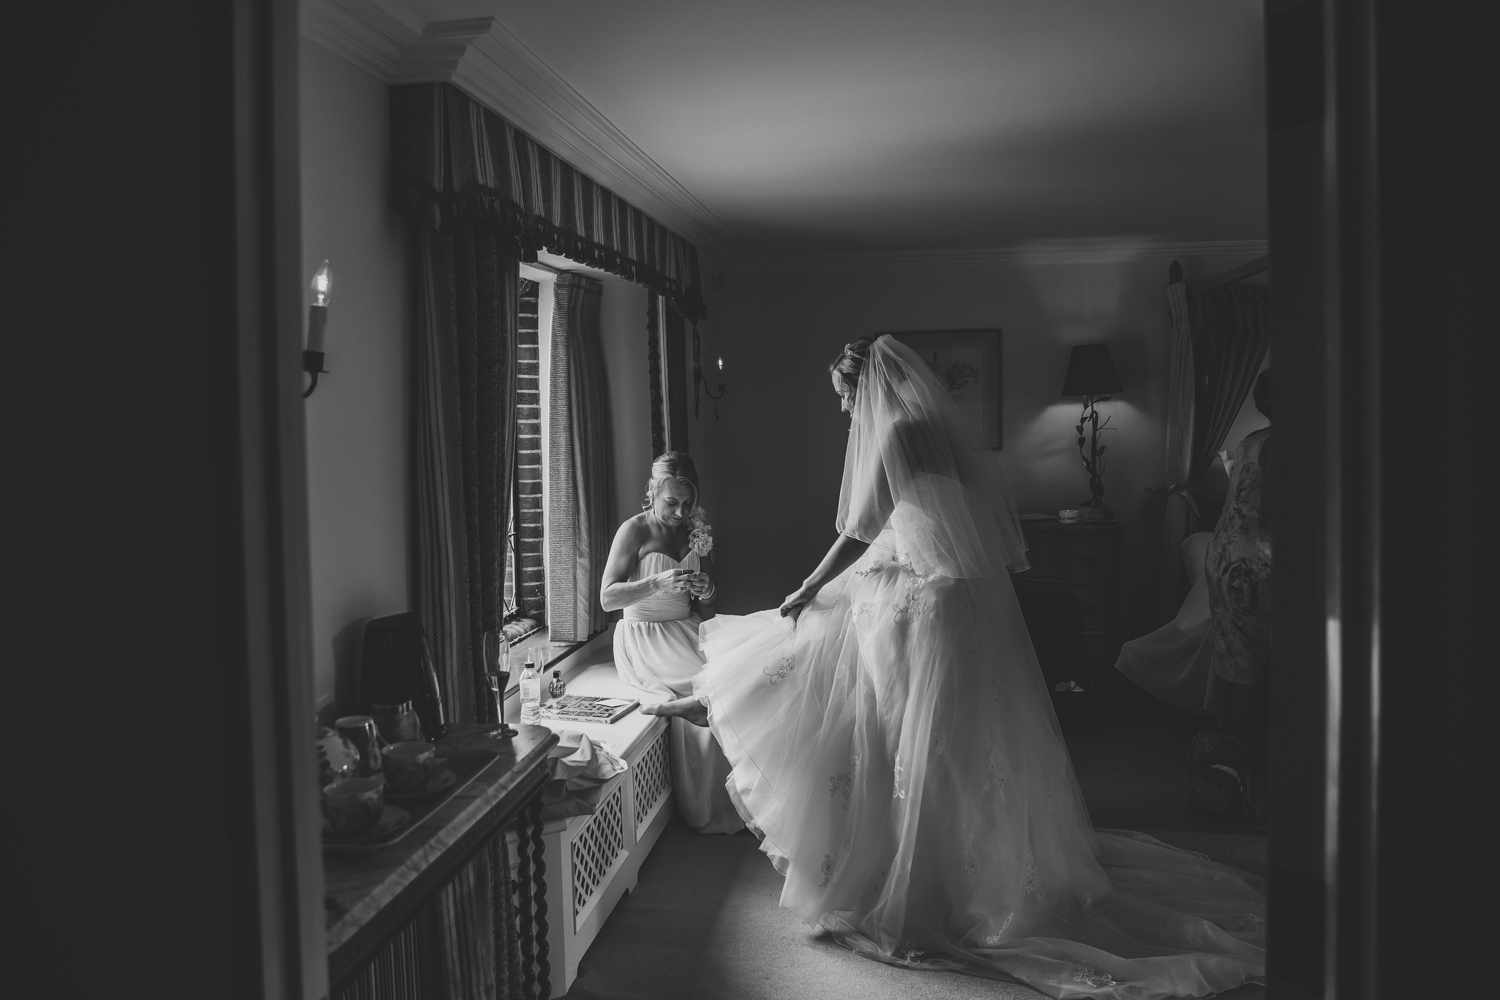 Bridal preparations at The Old Hall Ely captured by an Ely Wedding Photographer